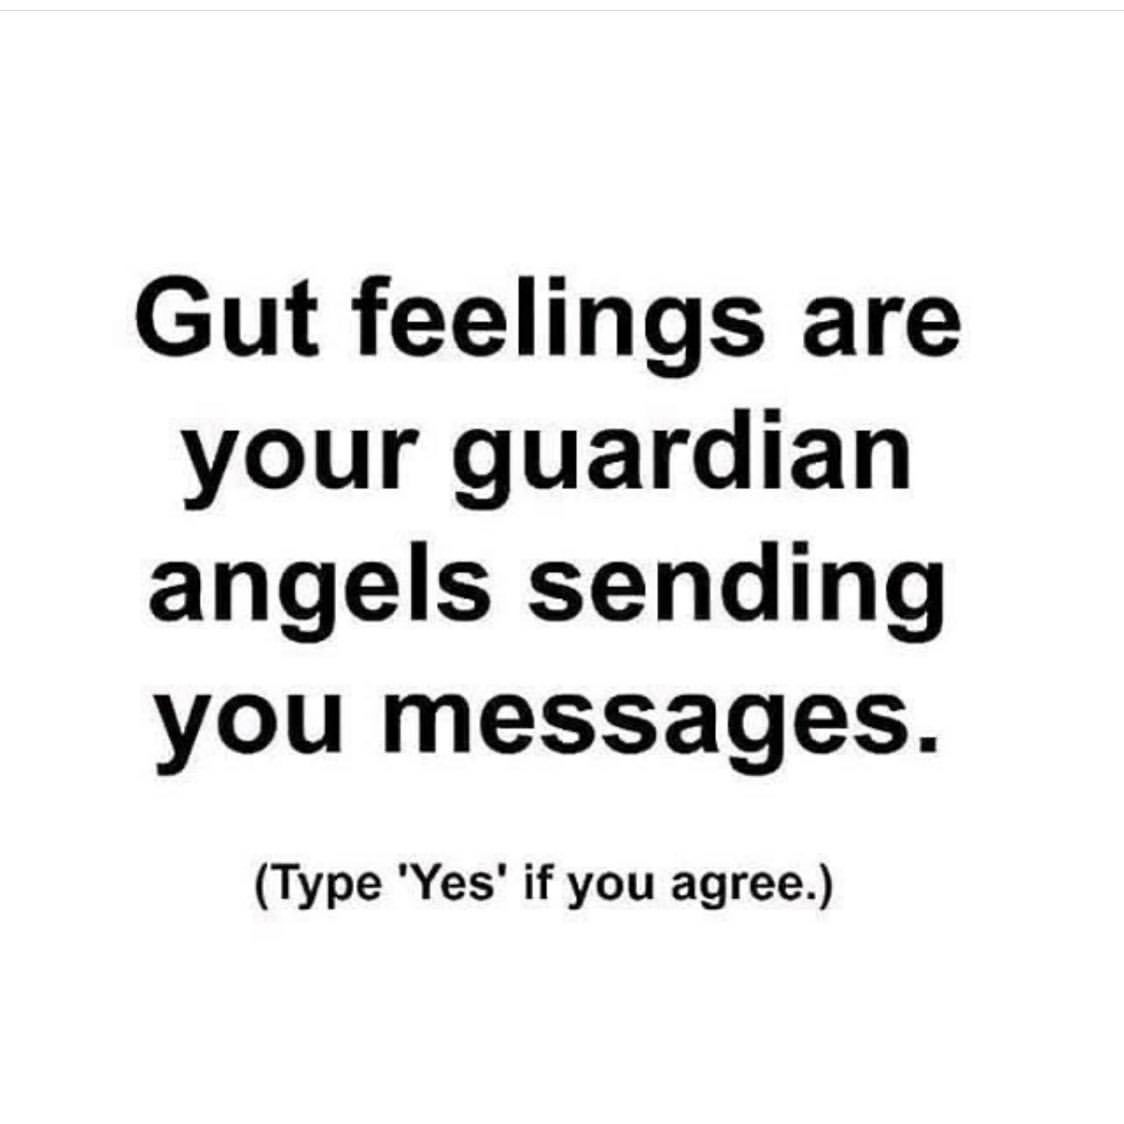 Gut feelings are your guardian angels sending you messages.